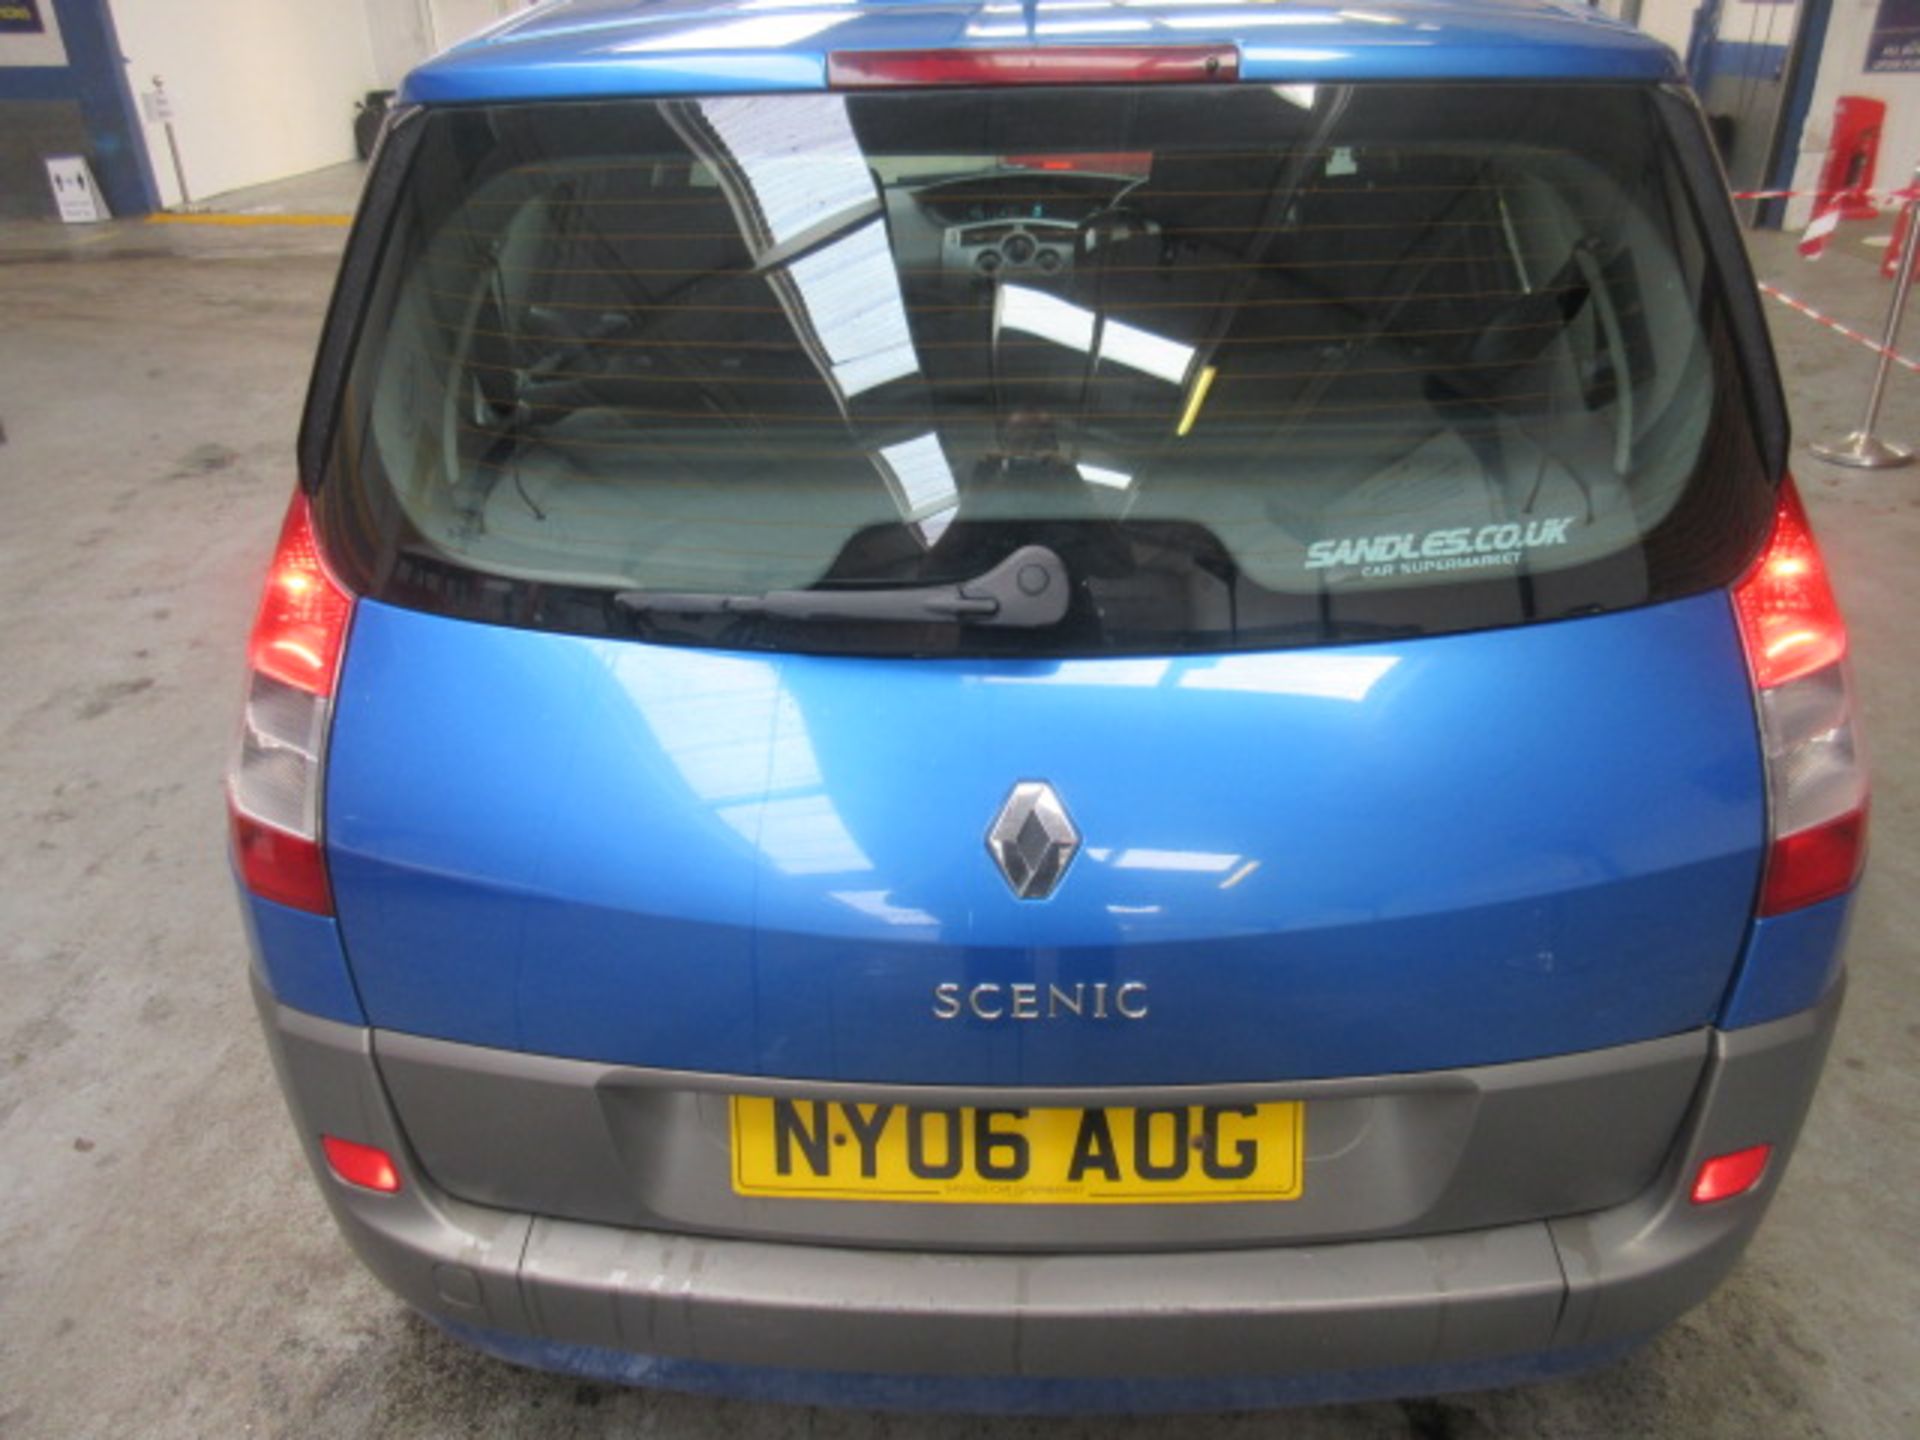 06 06 Renault Scenic Dynamique - Image 4 of 9